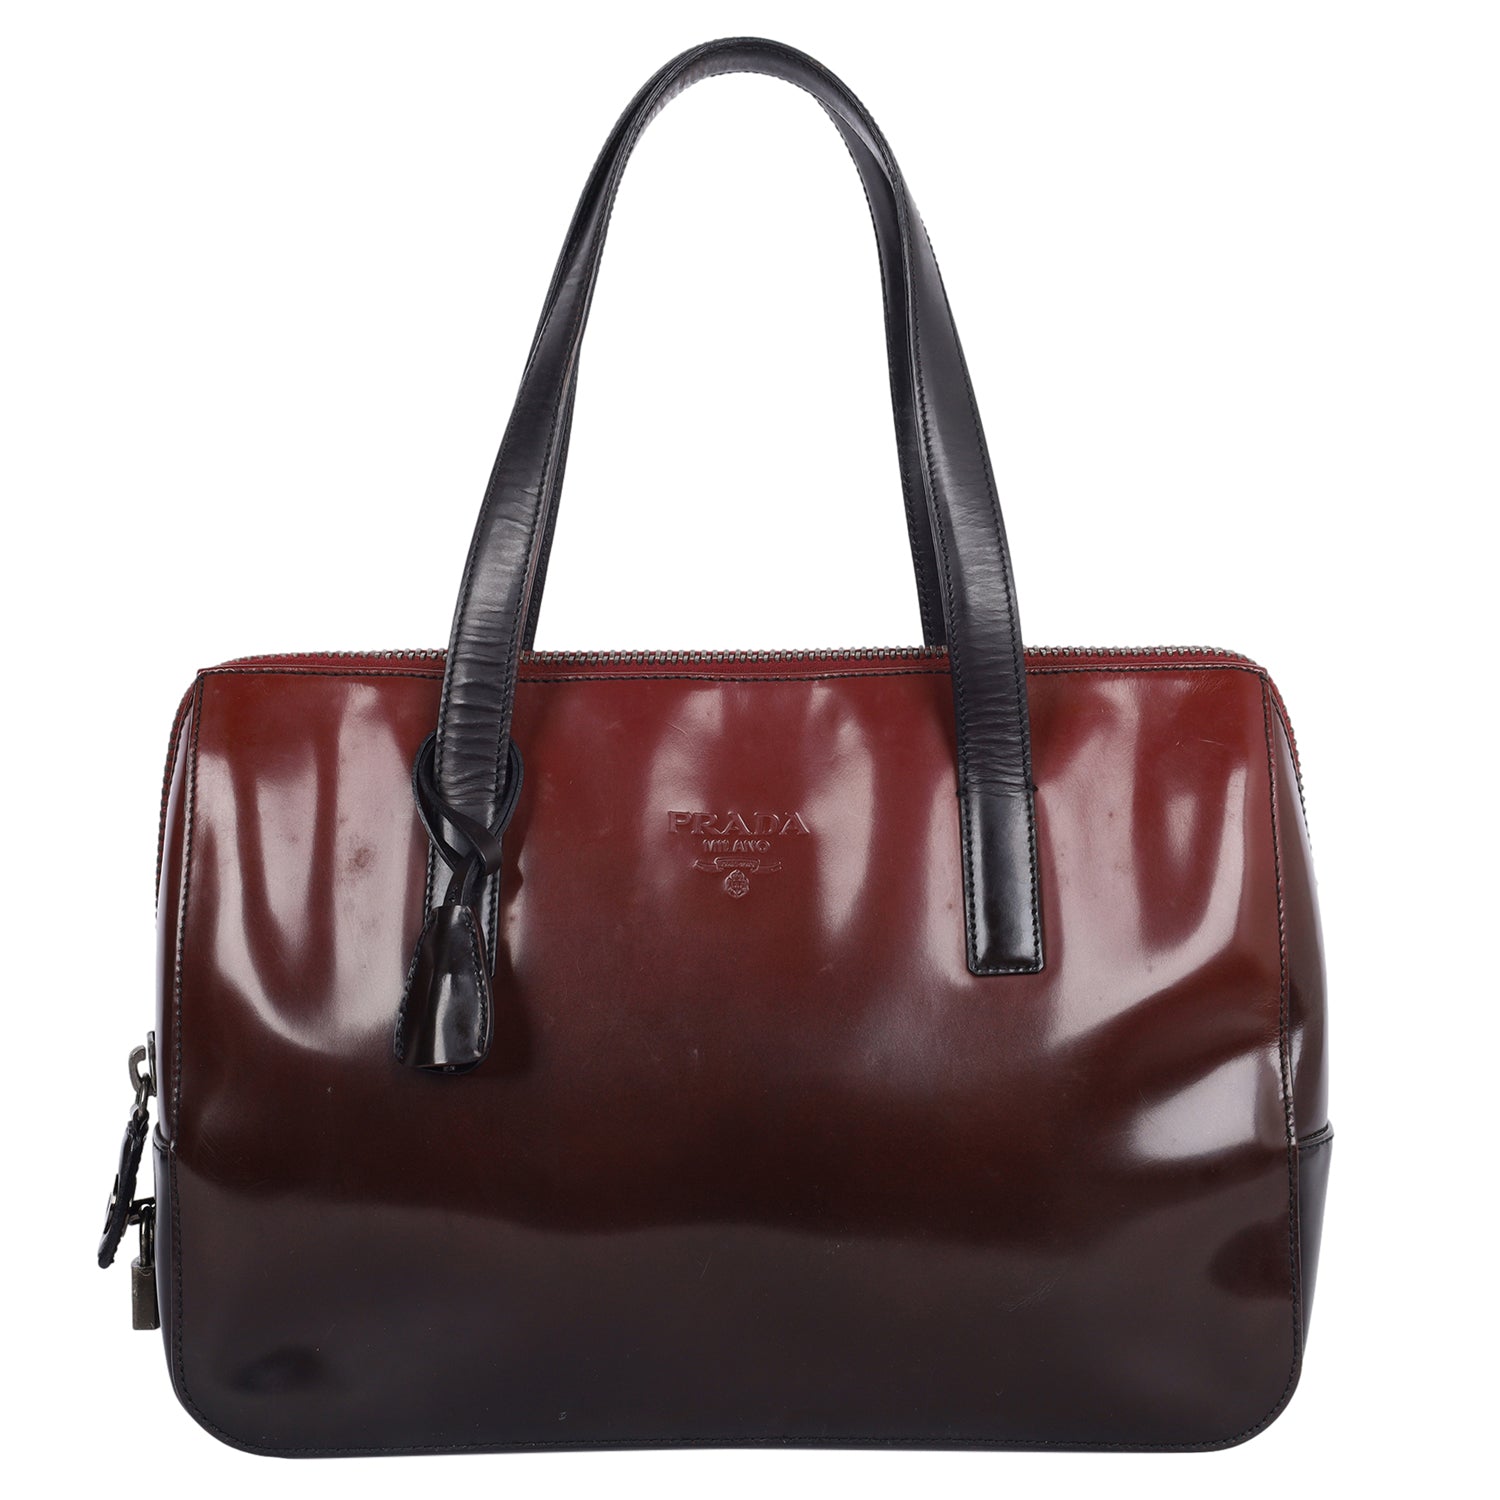 Patent Leather Handbag Satchel (Authentic Pre-Owned) – The Lady Bag